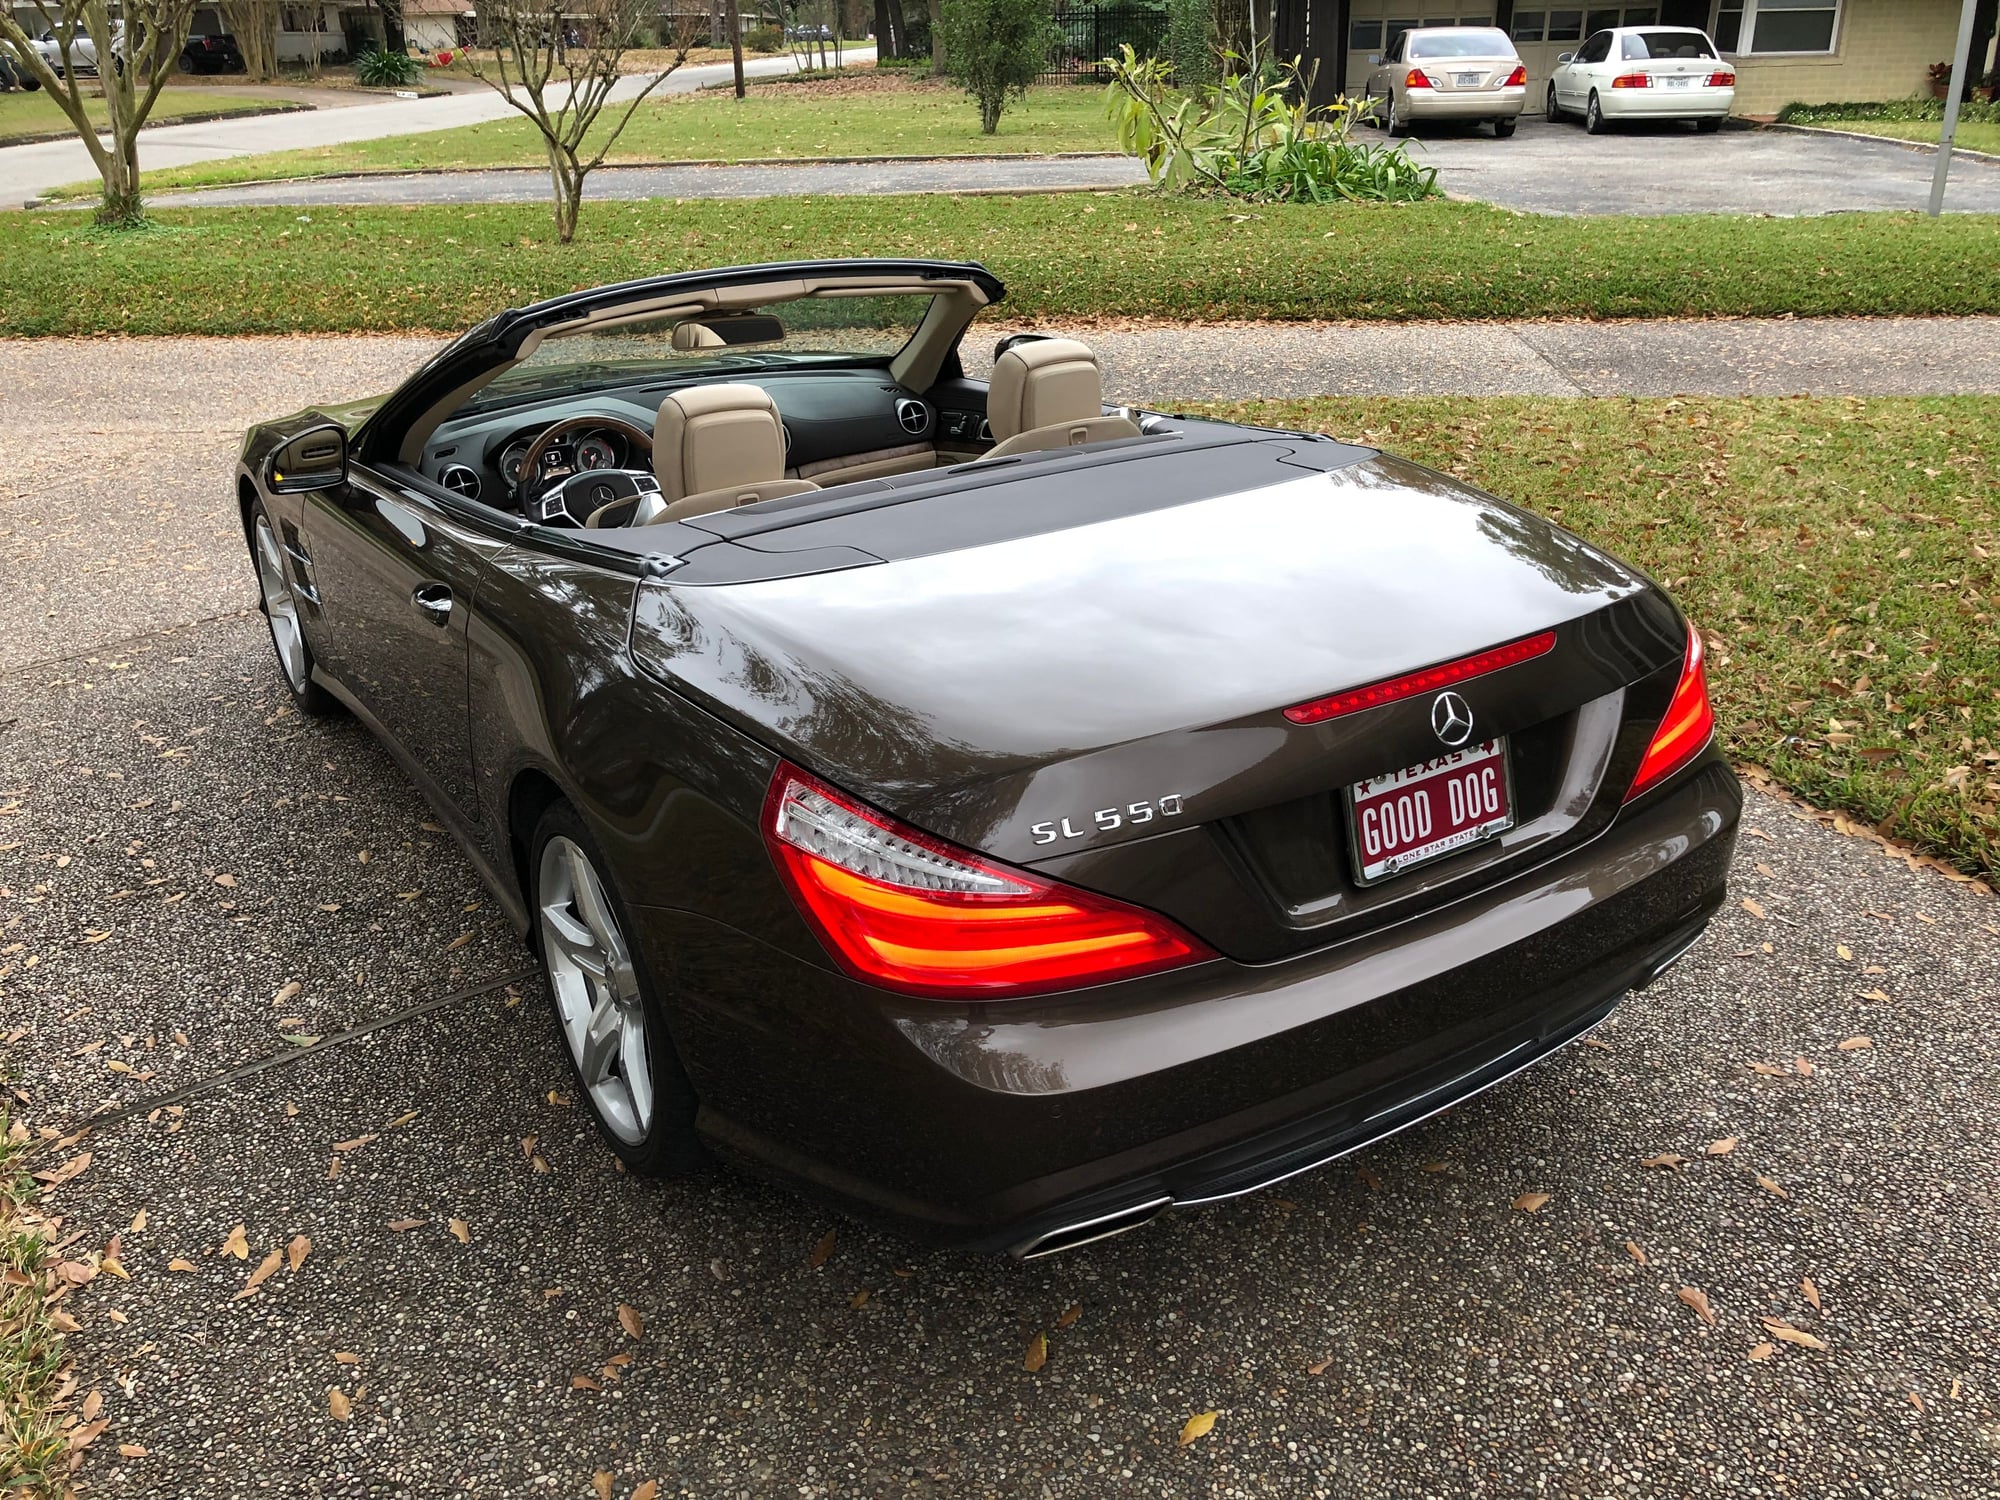 2013 Mercedes-Benz SL550 - 2013 SL550 with CPO warranty, very low miles, loaded with options, rare color combo - Used - VIN WDDJK7DA7DF016702 - 13,700 Miles - 8 cyl - 2WD - Automatic - Convertible - Brown - Houston, TX 77008, United States